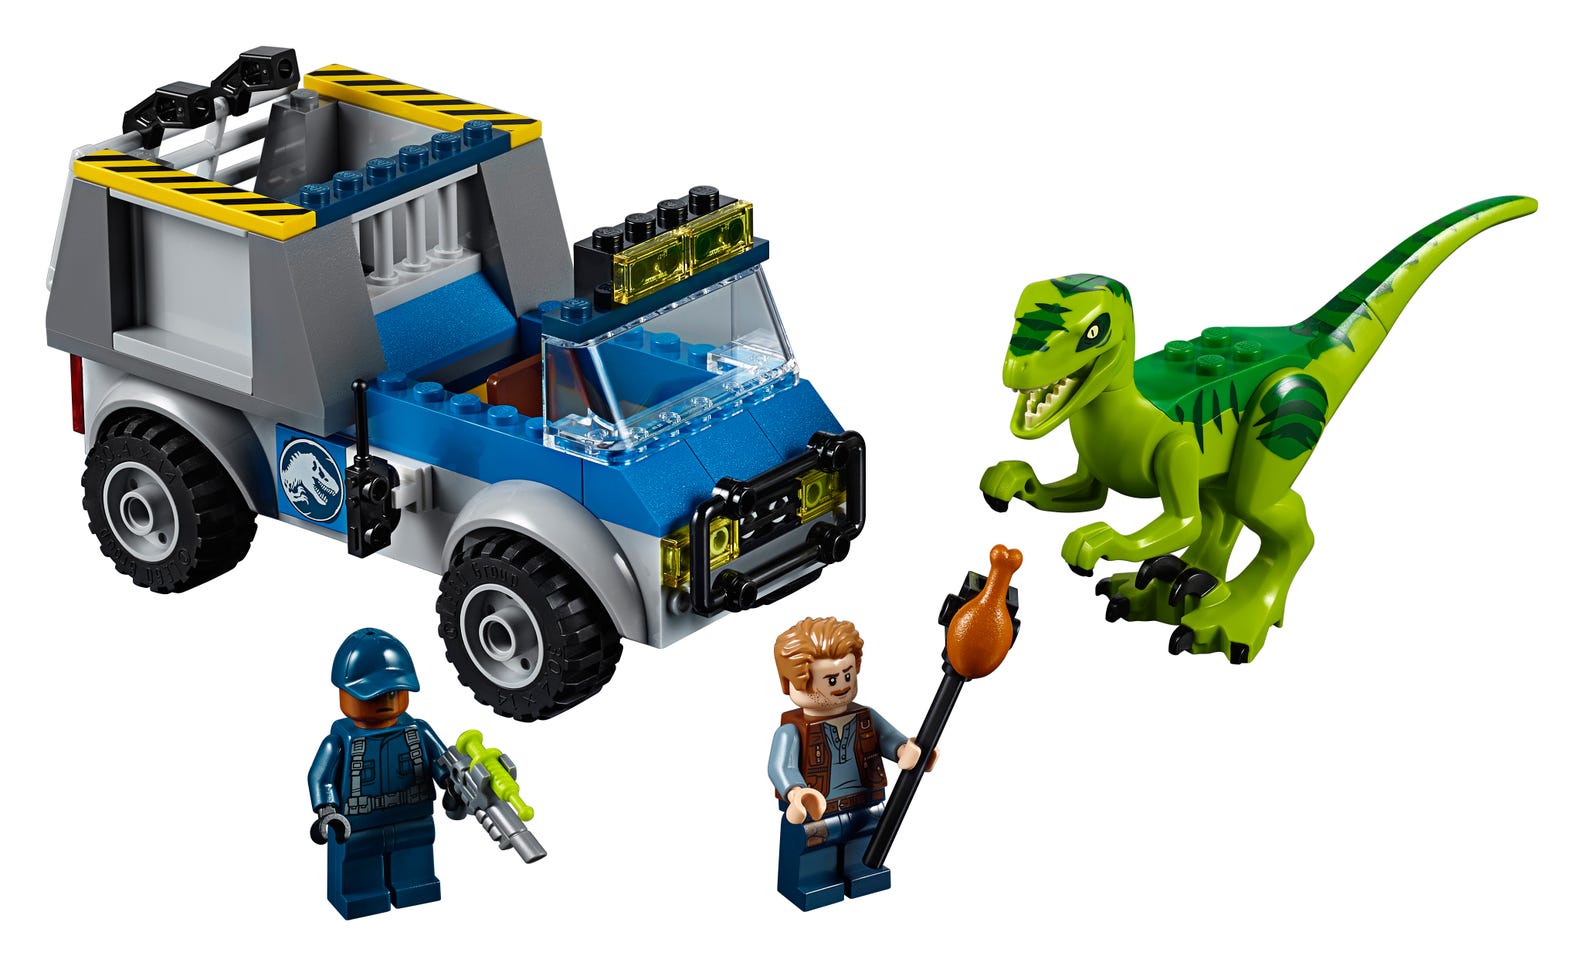 LEGO Juniors/4+ Jurassic World Raptor Rescue Truck 10757 Building Kit (85 Pieces) (Discontinued by Manufacturer)